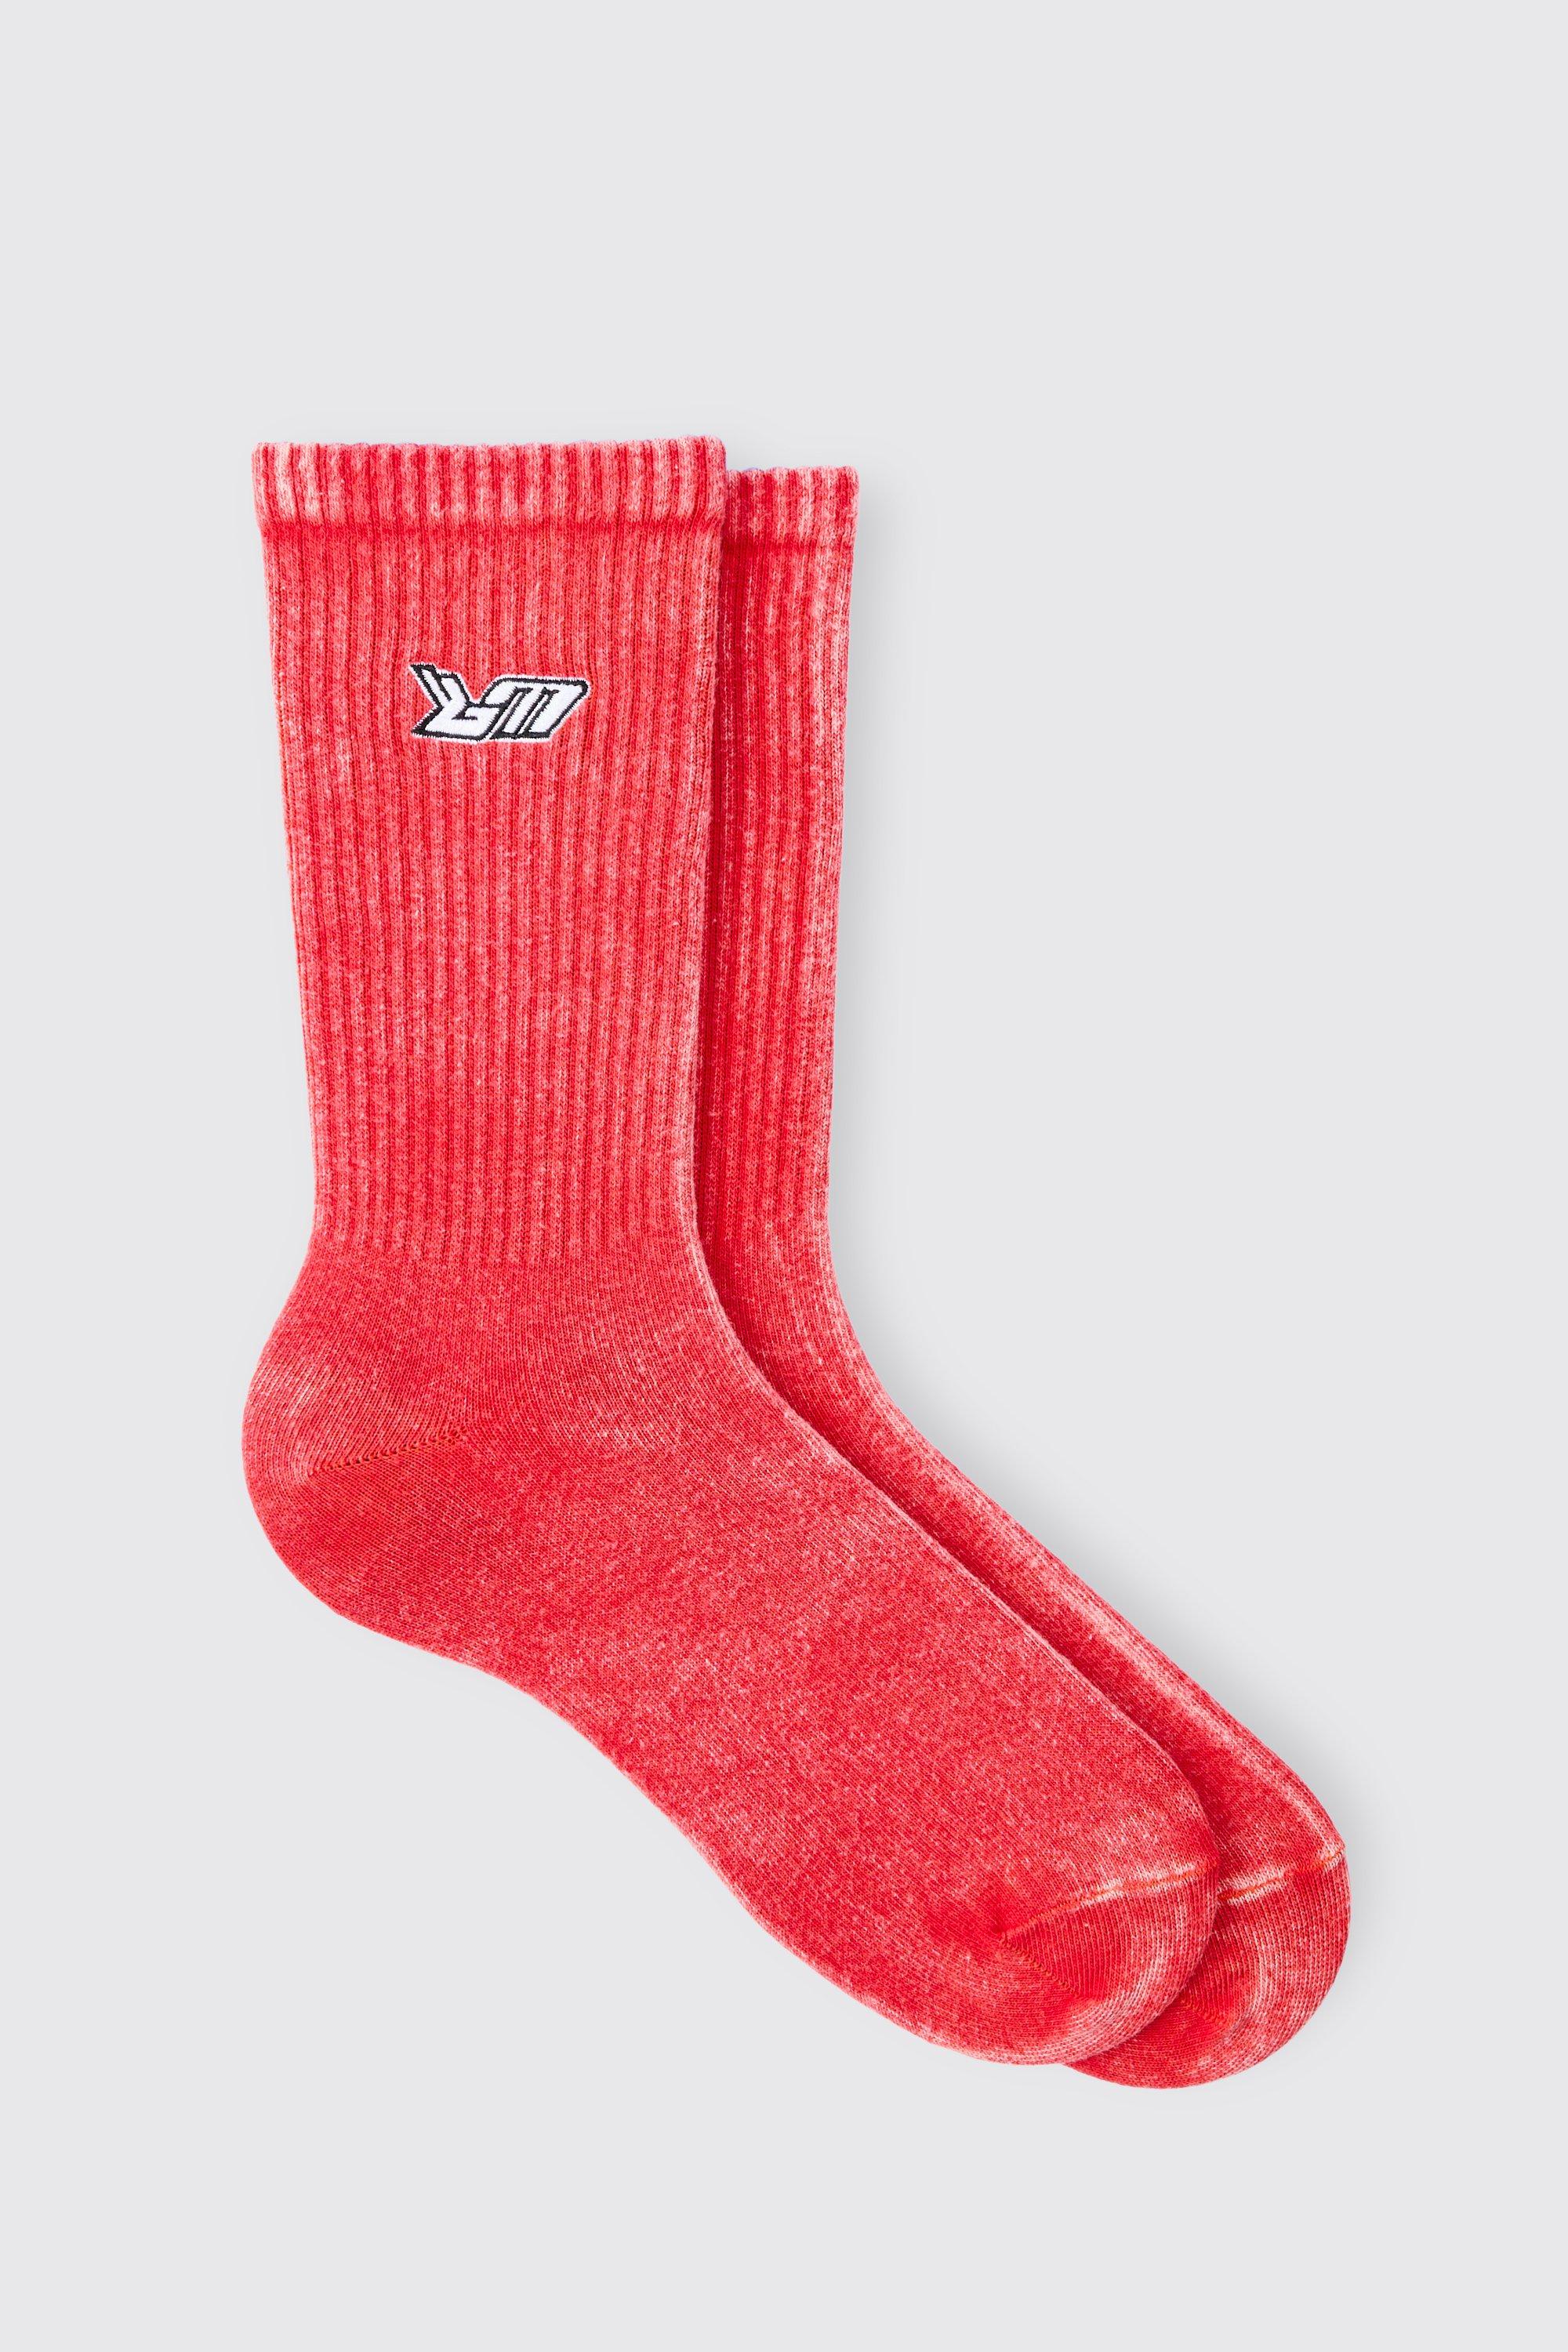 Image of Acid Wash Bm Embroidered Socks In Red, Rosso